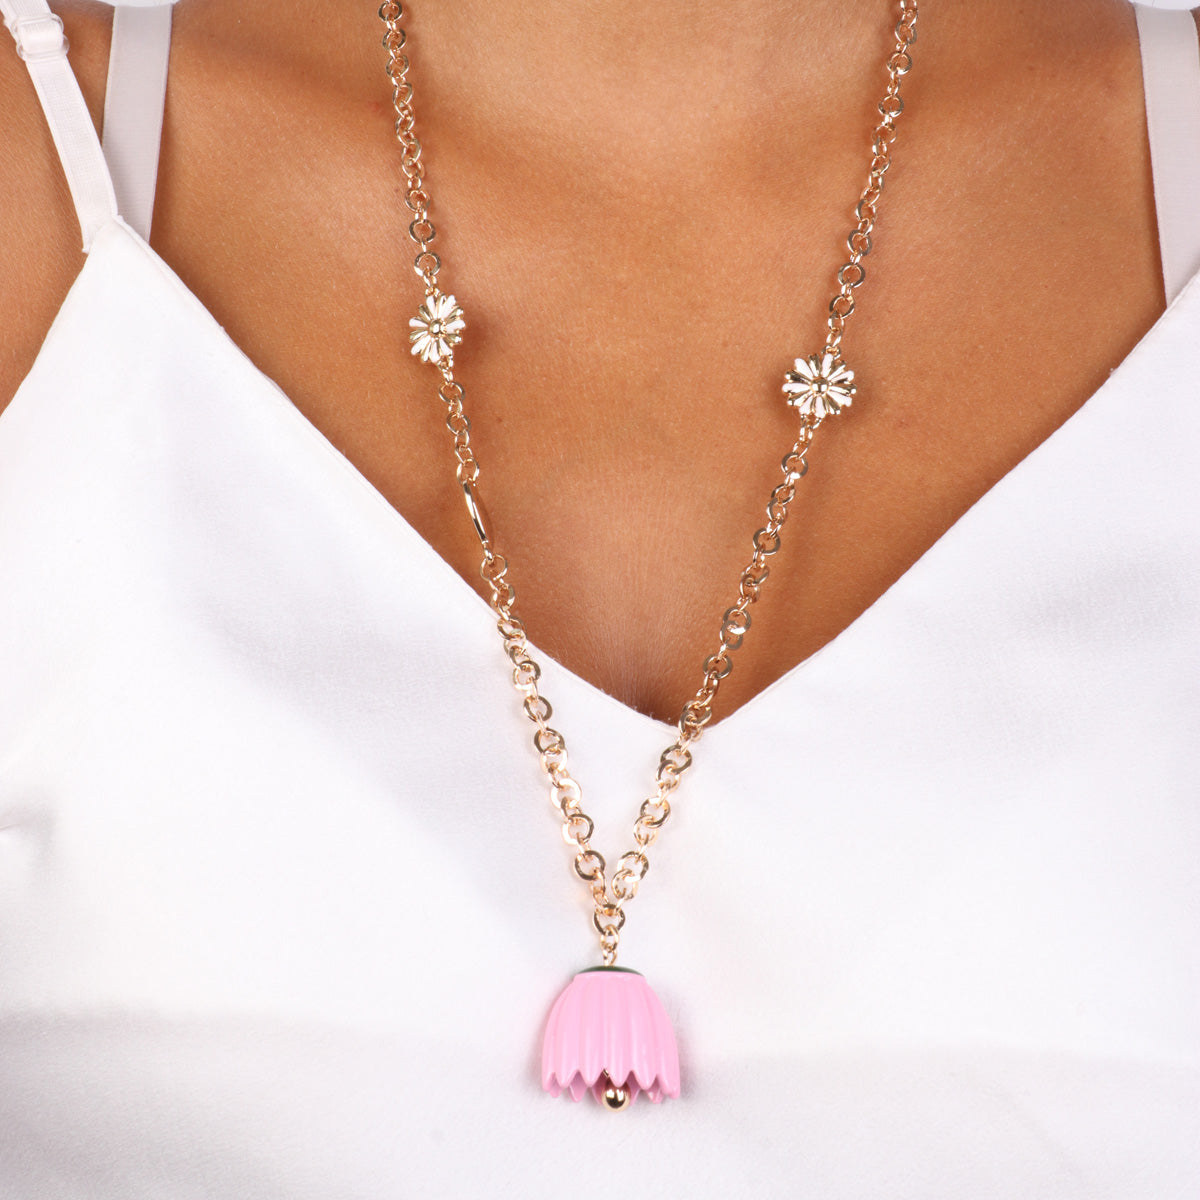 Metal necklace with flower -shaped details, heart and bell pendant in the shape of a pink bell -shaped flower